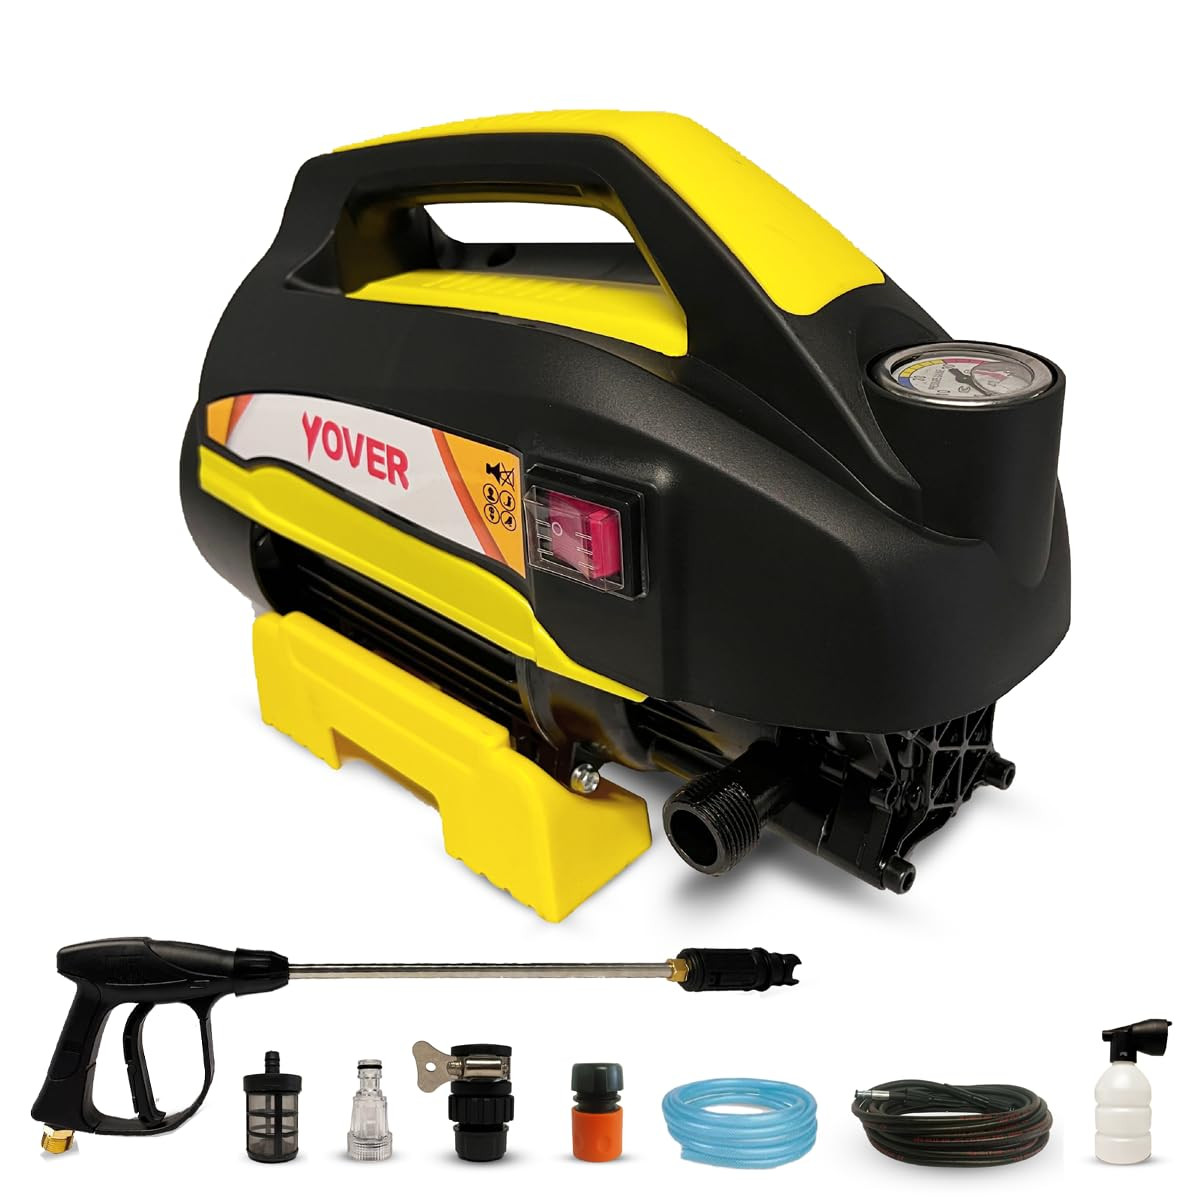 IBELL Yover YO2400 Induction Motor High Pressure Washer 2400 Watts Motor 170 Bars 11 LMin Flow Rate 8 Meters Outlet Hose Portable for Car Bike and Home Cleaning Purpose